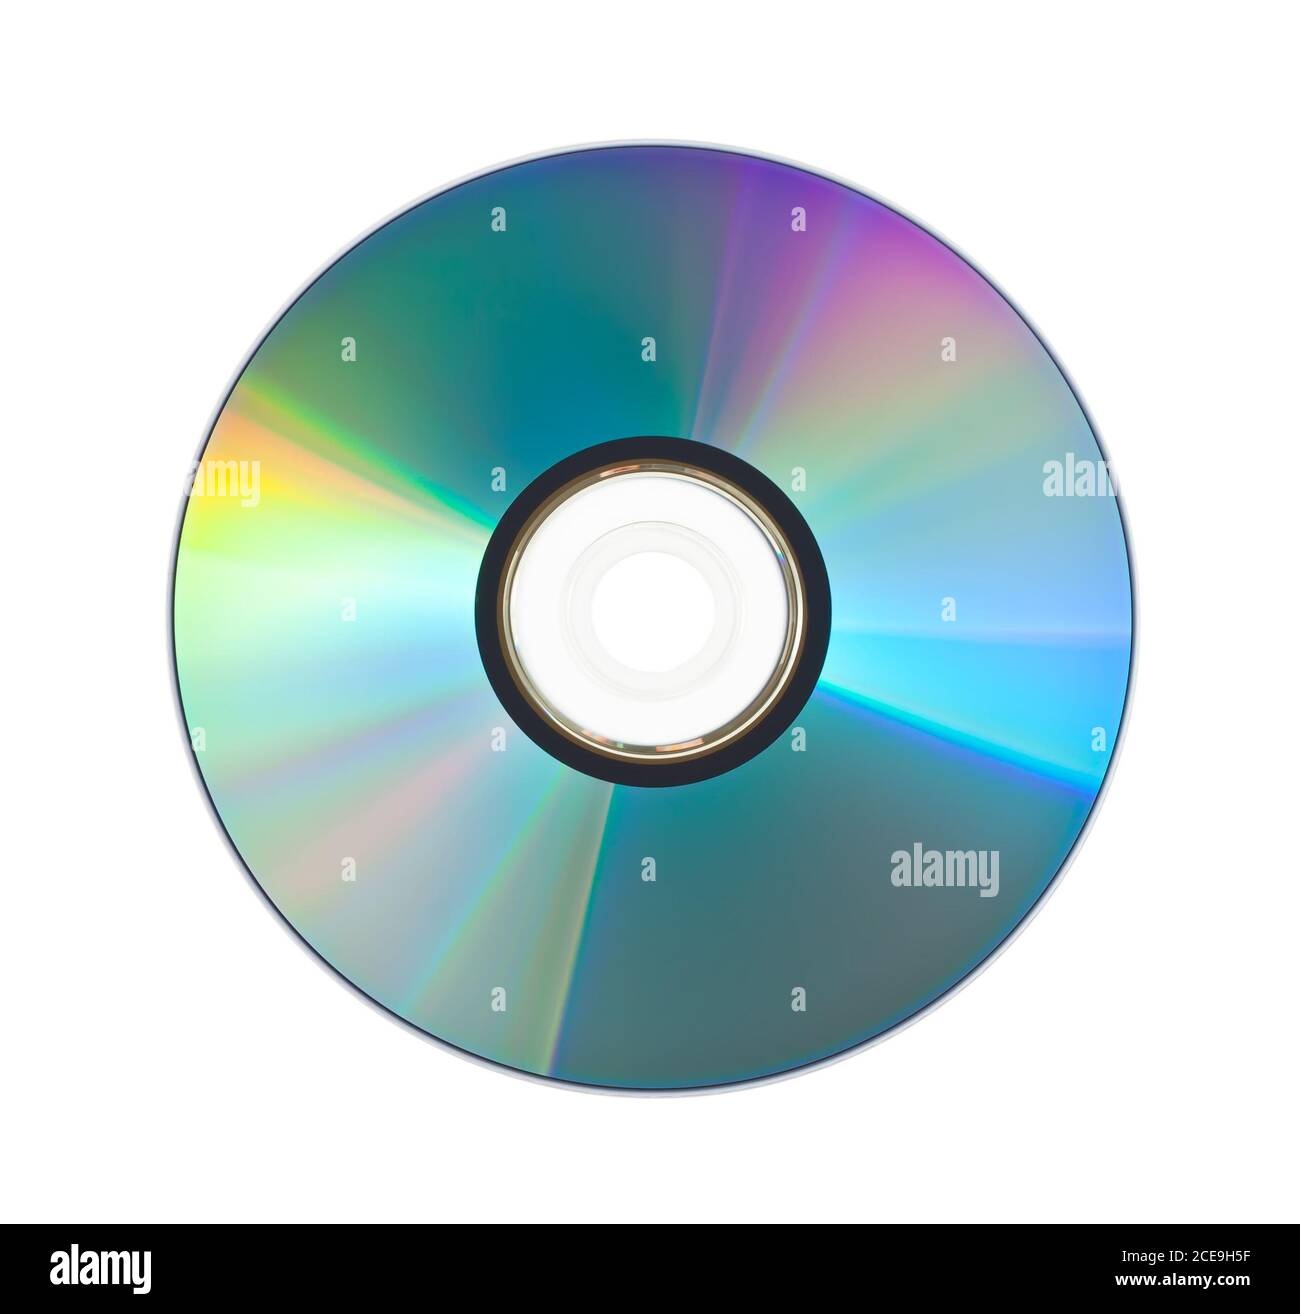 cd or a dvd rom Stock Photo